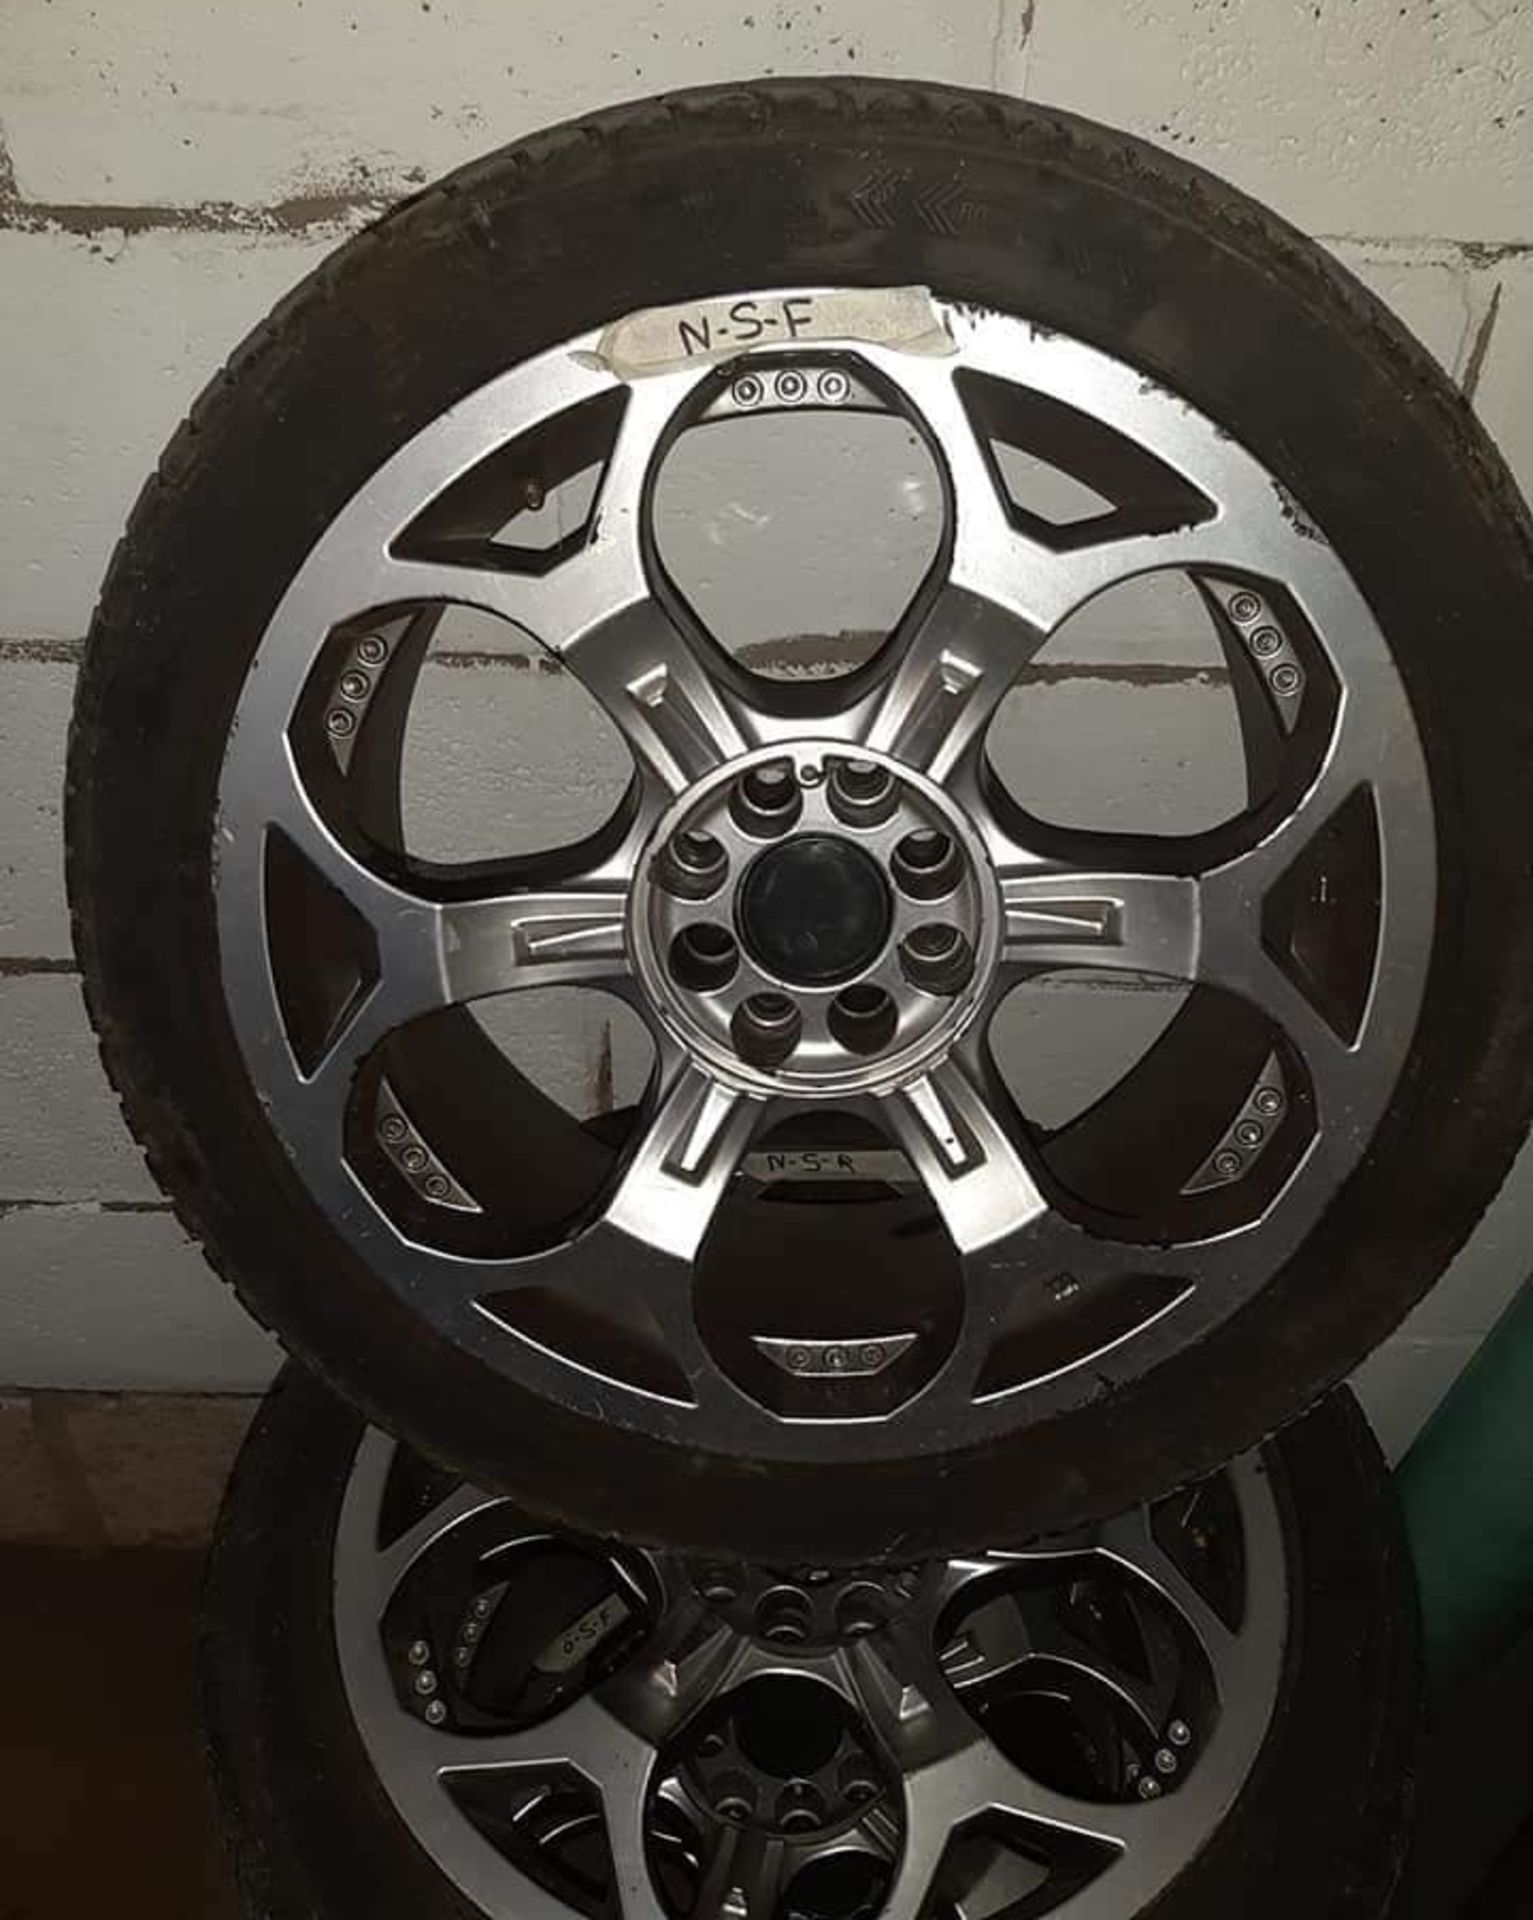 Set of 4 Multi Fitment 4 Stud 17" x 7.0" Alloy Wheels with 205/45ZR17 Tyres - CL444 - No VAT on - Image 6 of 9